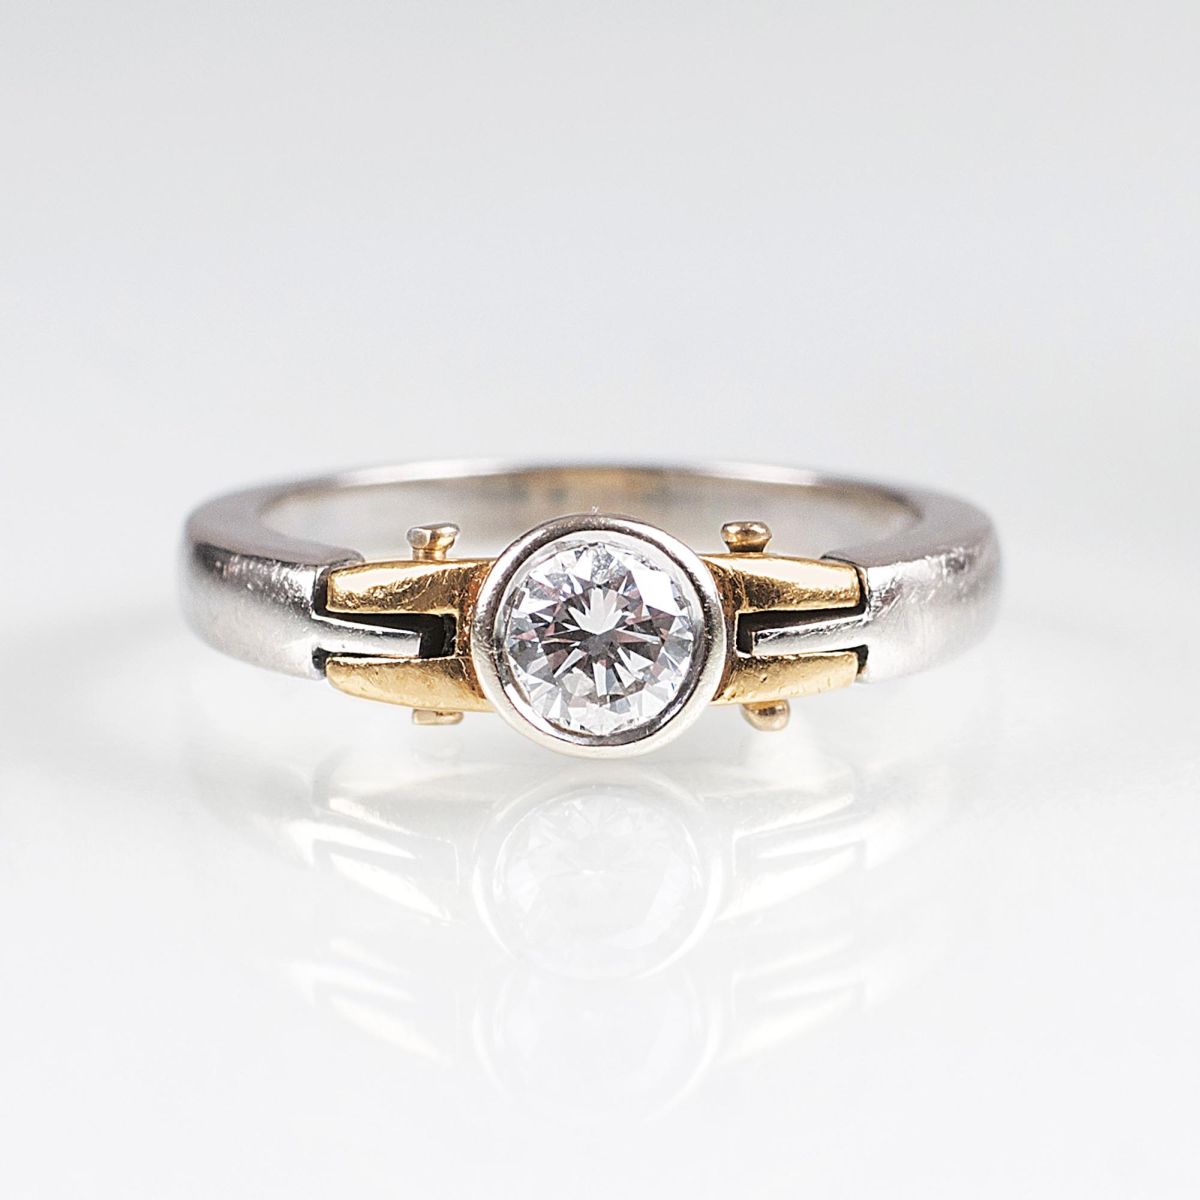 A Solitaire Diamond Ring by Jeweller Wempe